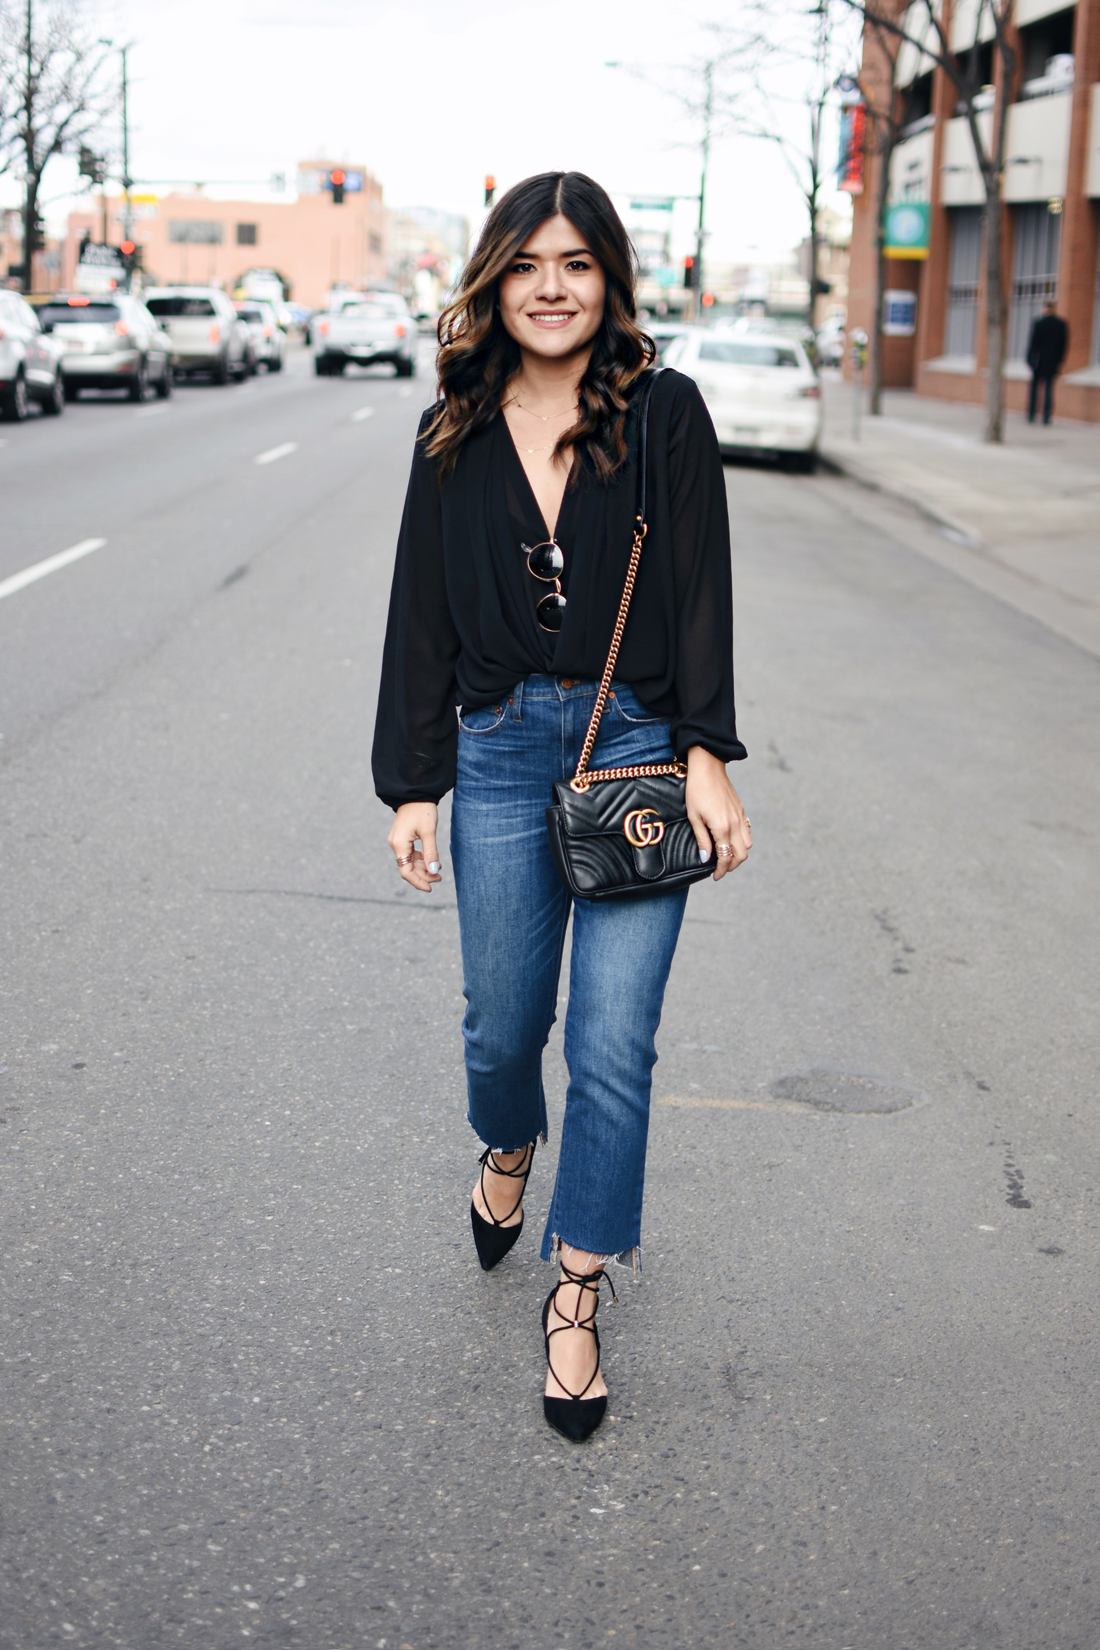 Carolina Hellal of Chic Talk wearing a Gucci Marmont bag, Madewell jeans, Forever 21 crossfront black top and Aldo black lace up pumps